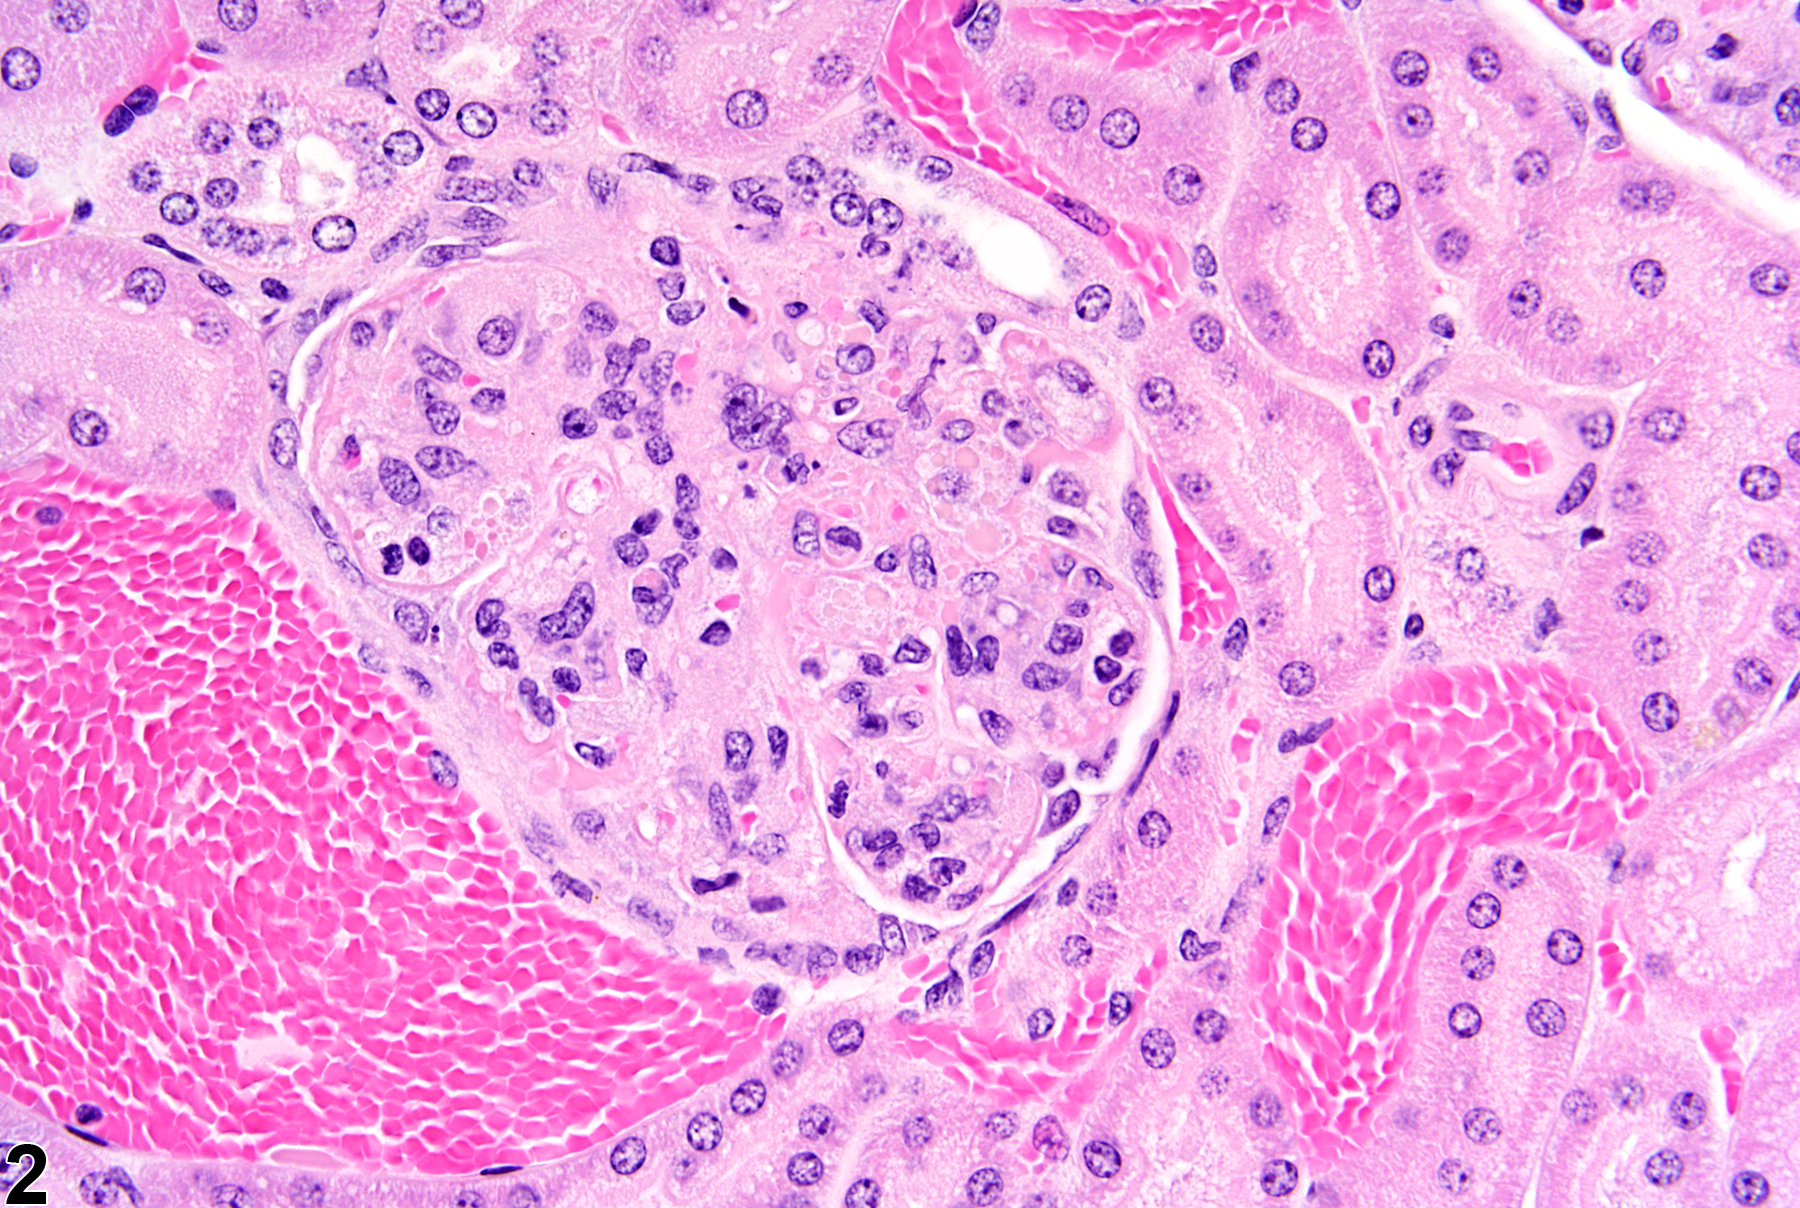 Image of glomerulonephritis in the kidney from a female B6C3F1 mouse in a chronic study